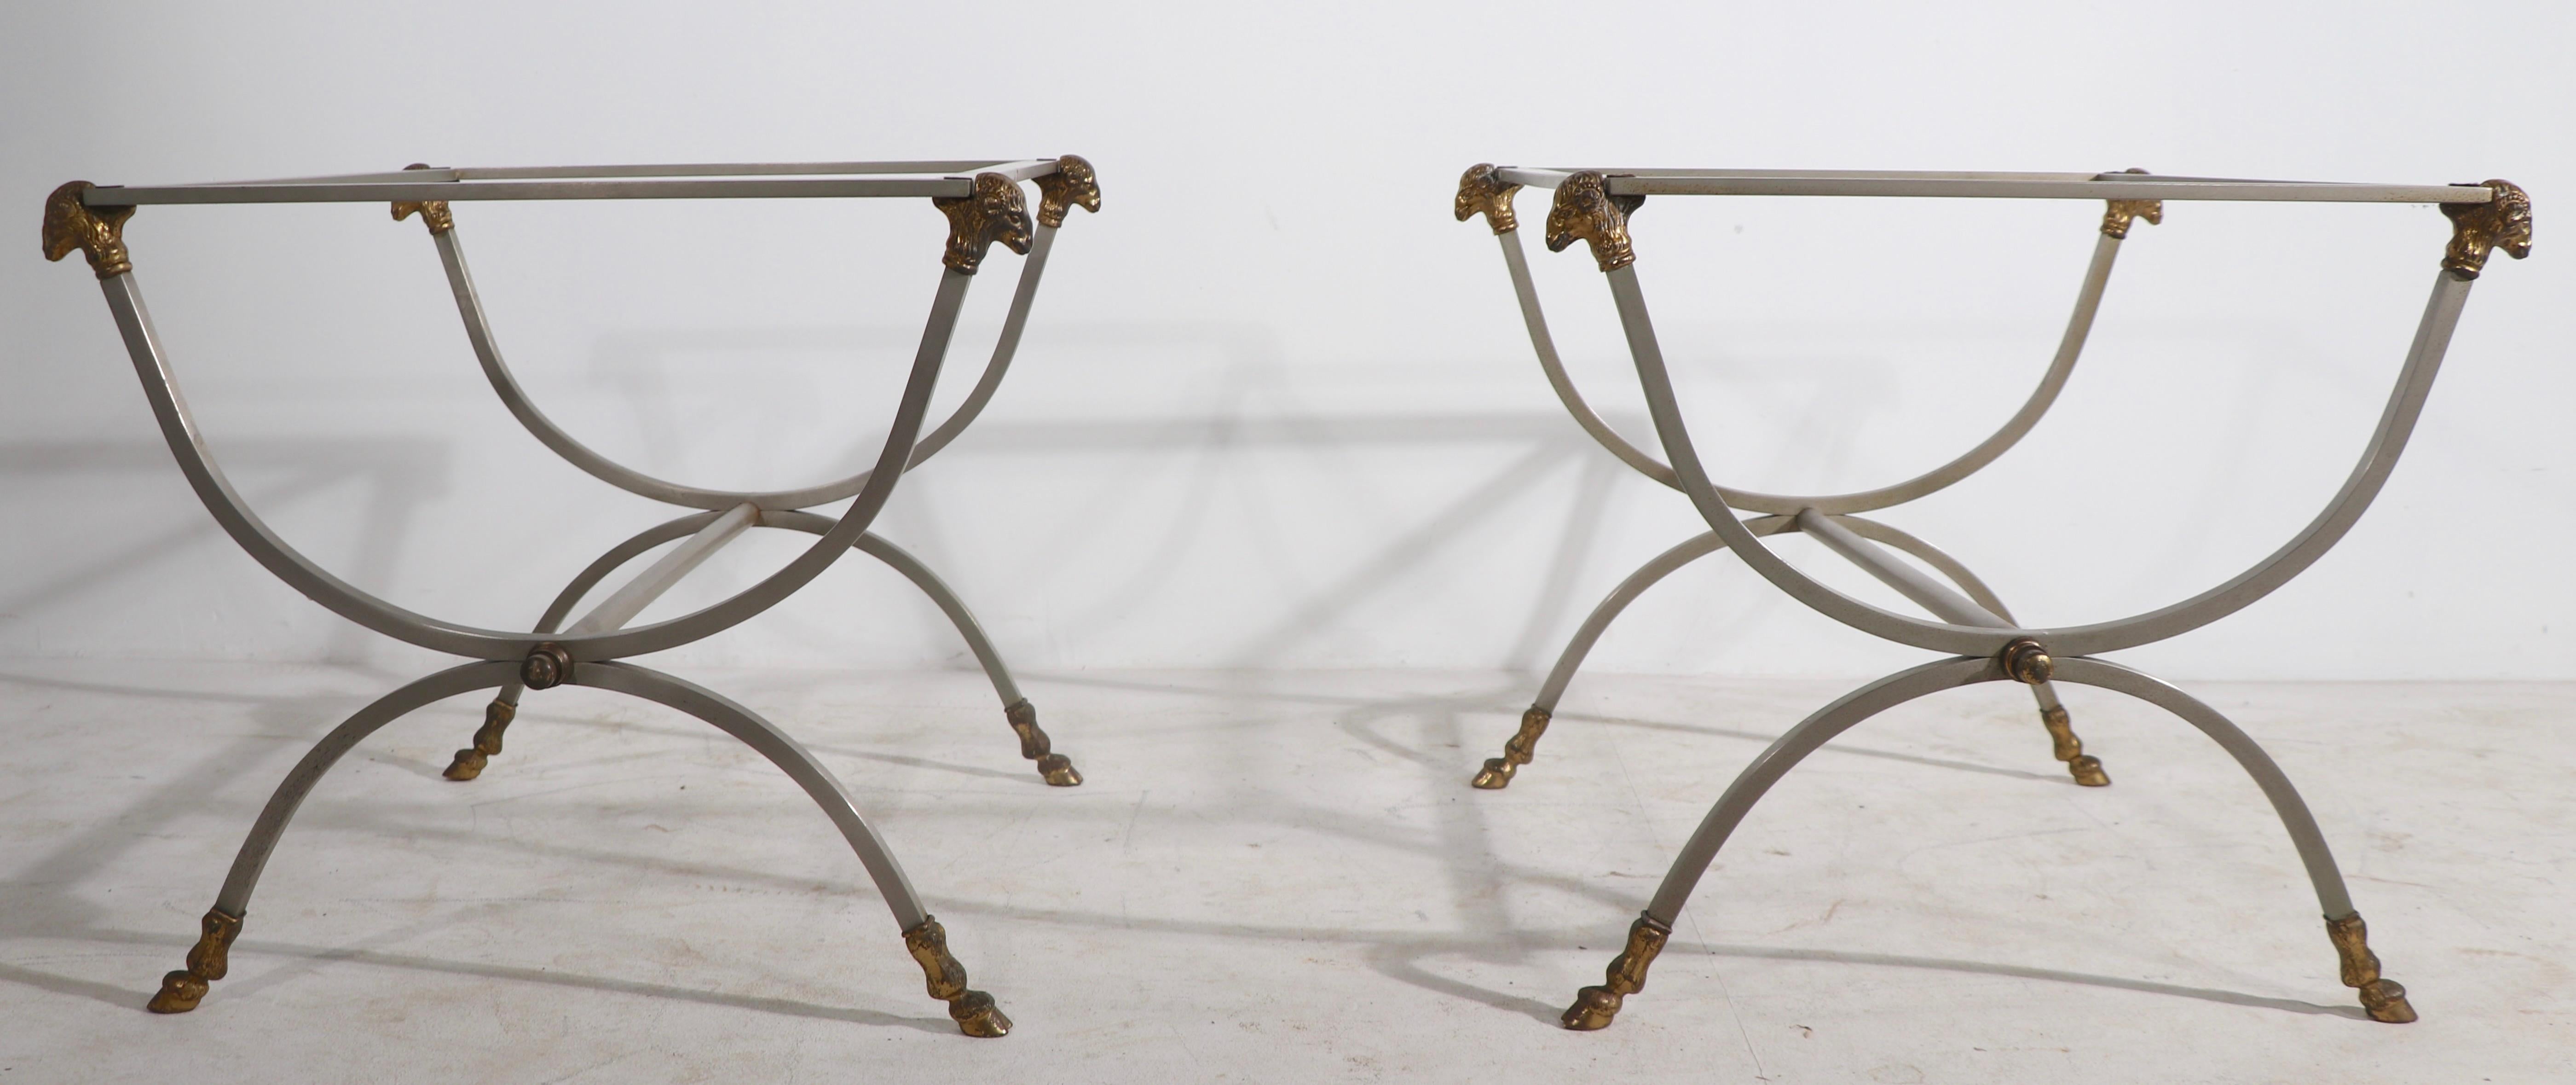 Chic pair of steel and brass end, or side, tables having square stock steel frames with cast brass goat heads, and hoofs as ornament. The tables are structurally sound and sturdy, they show minor surface wear, most of which will polish out, and they